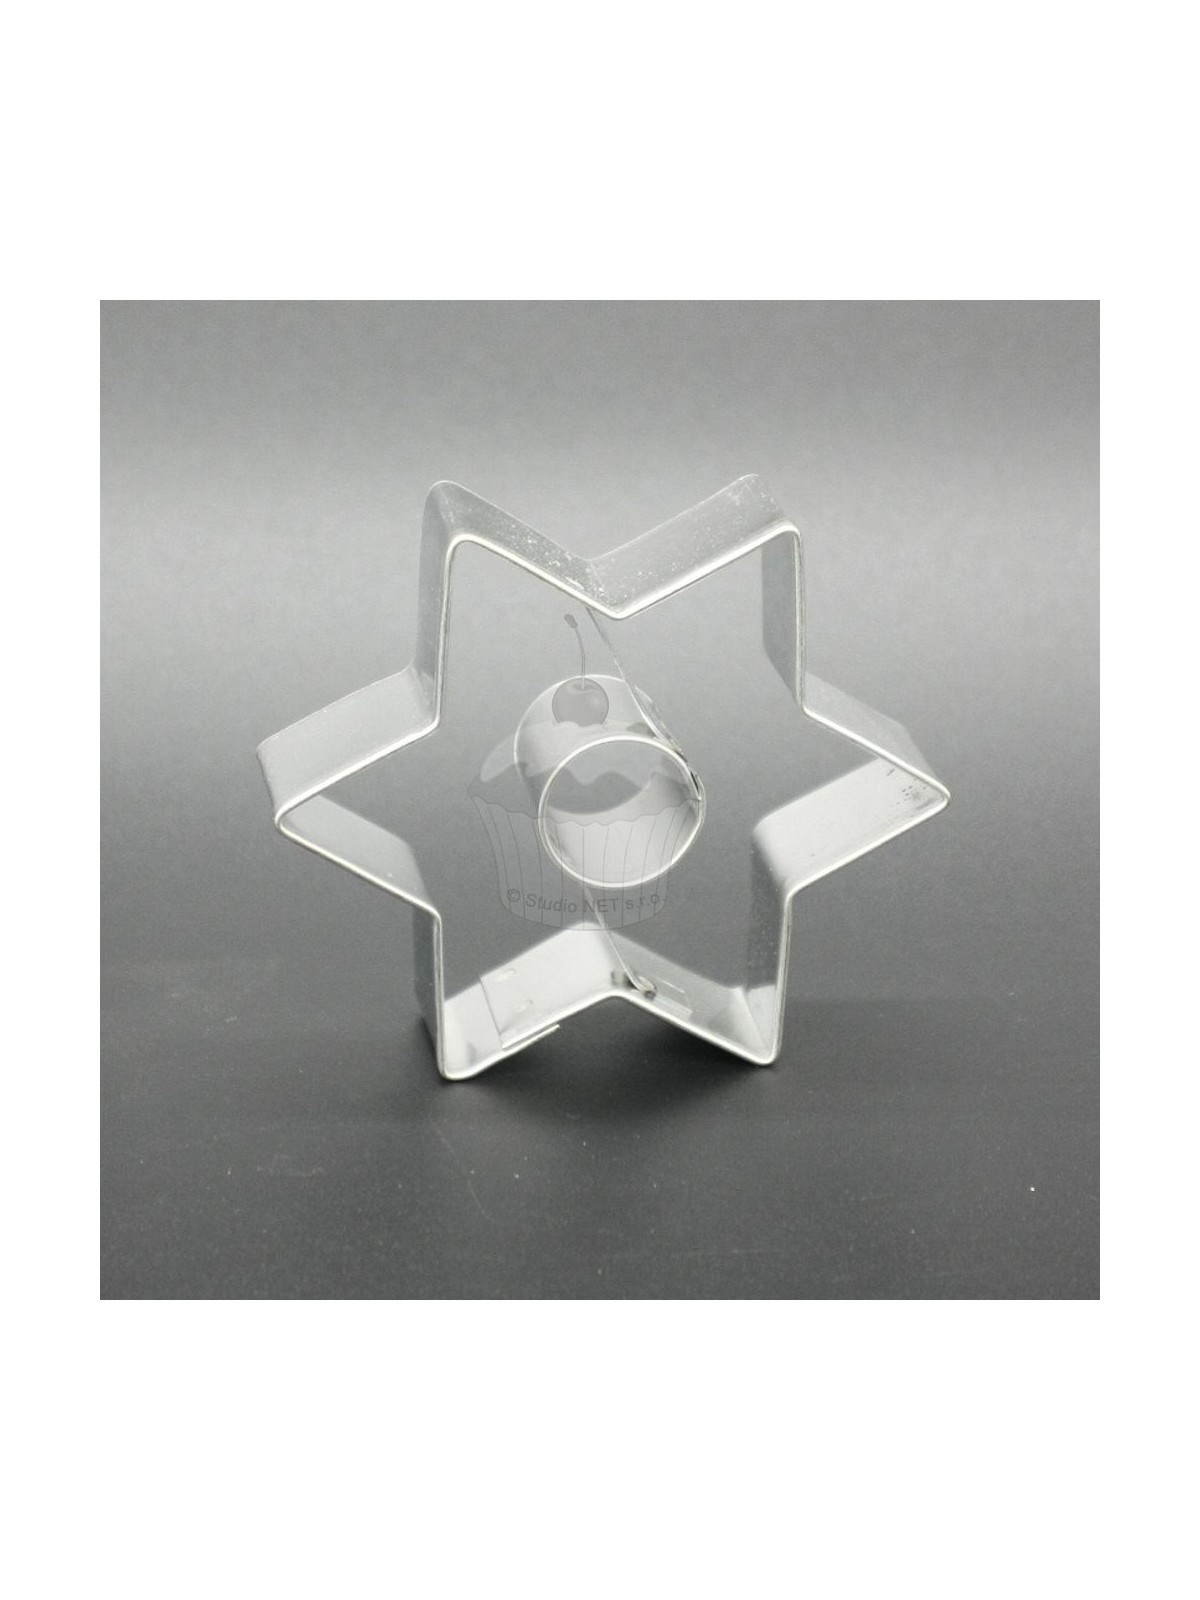 Cookie cutter - large star + wheel